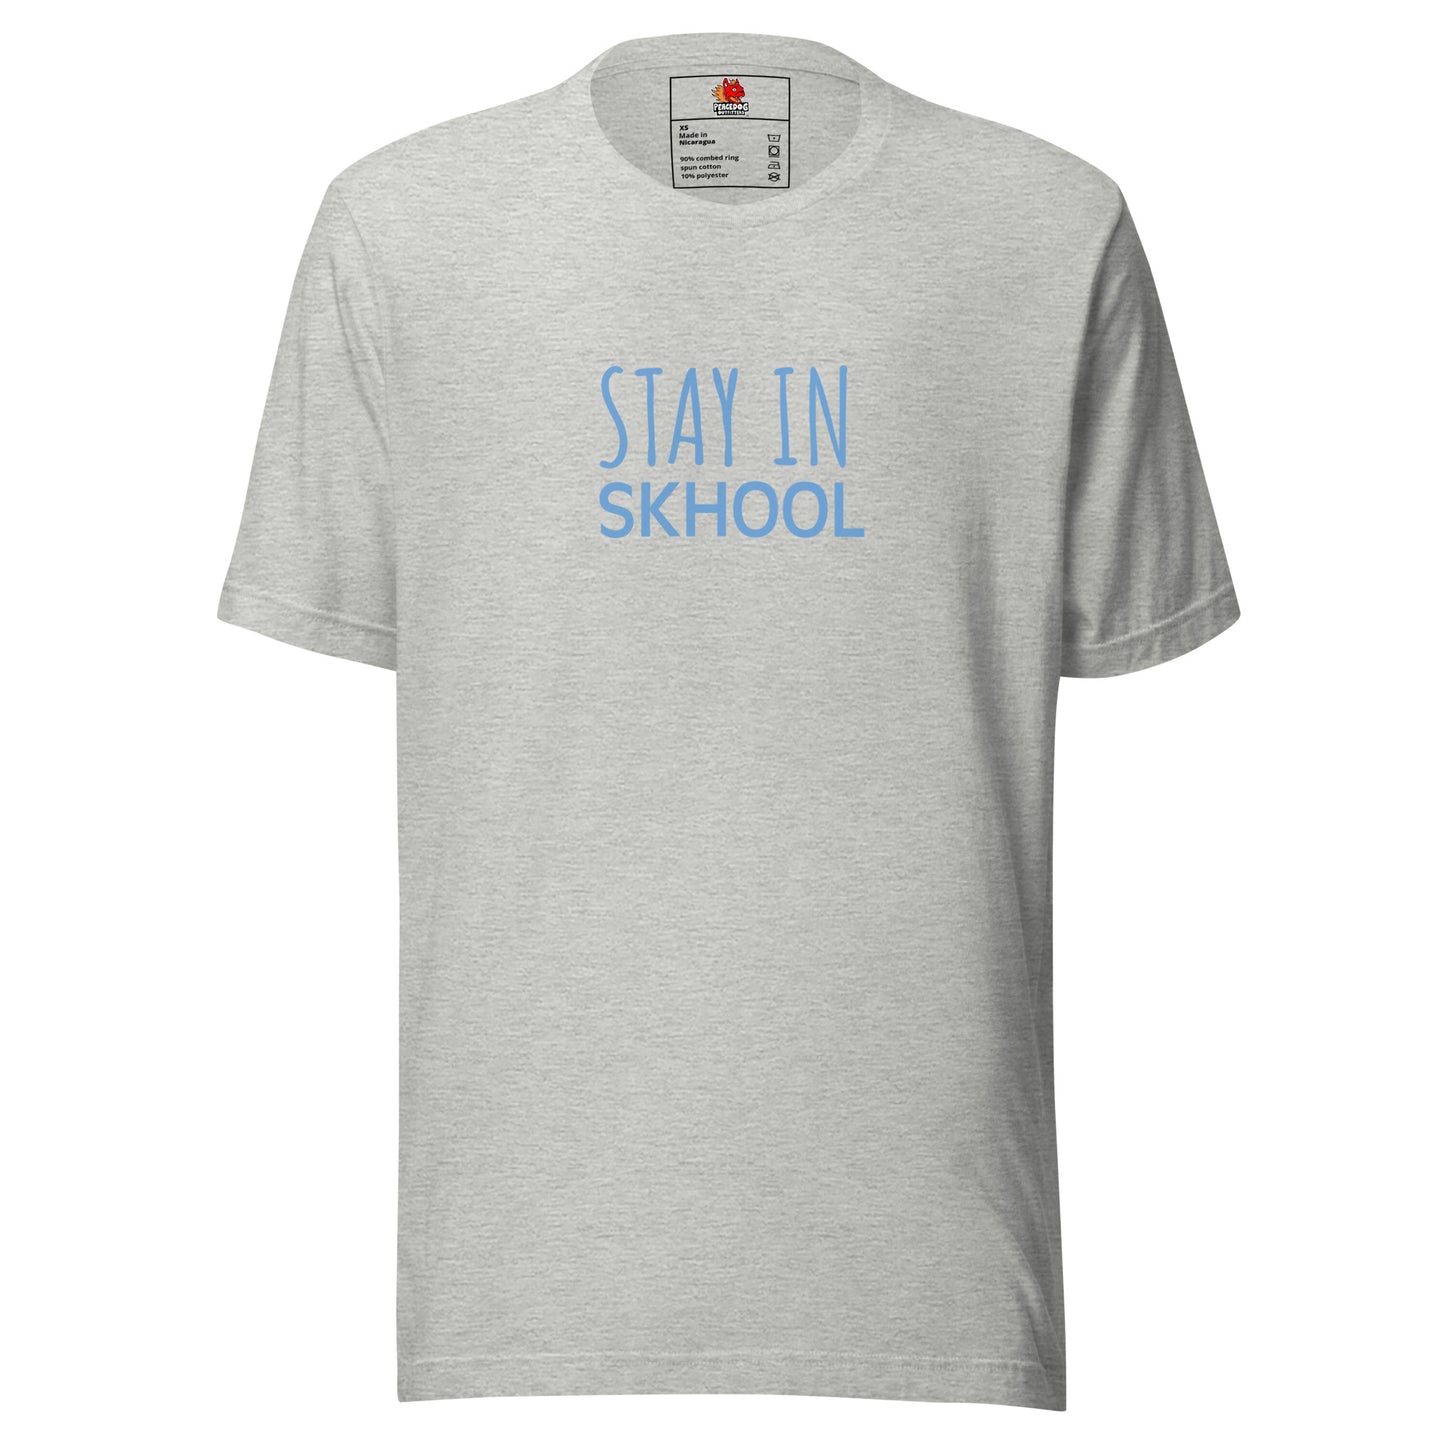 Stay in Skhool T-shirt